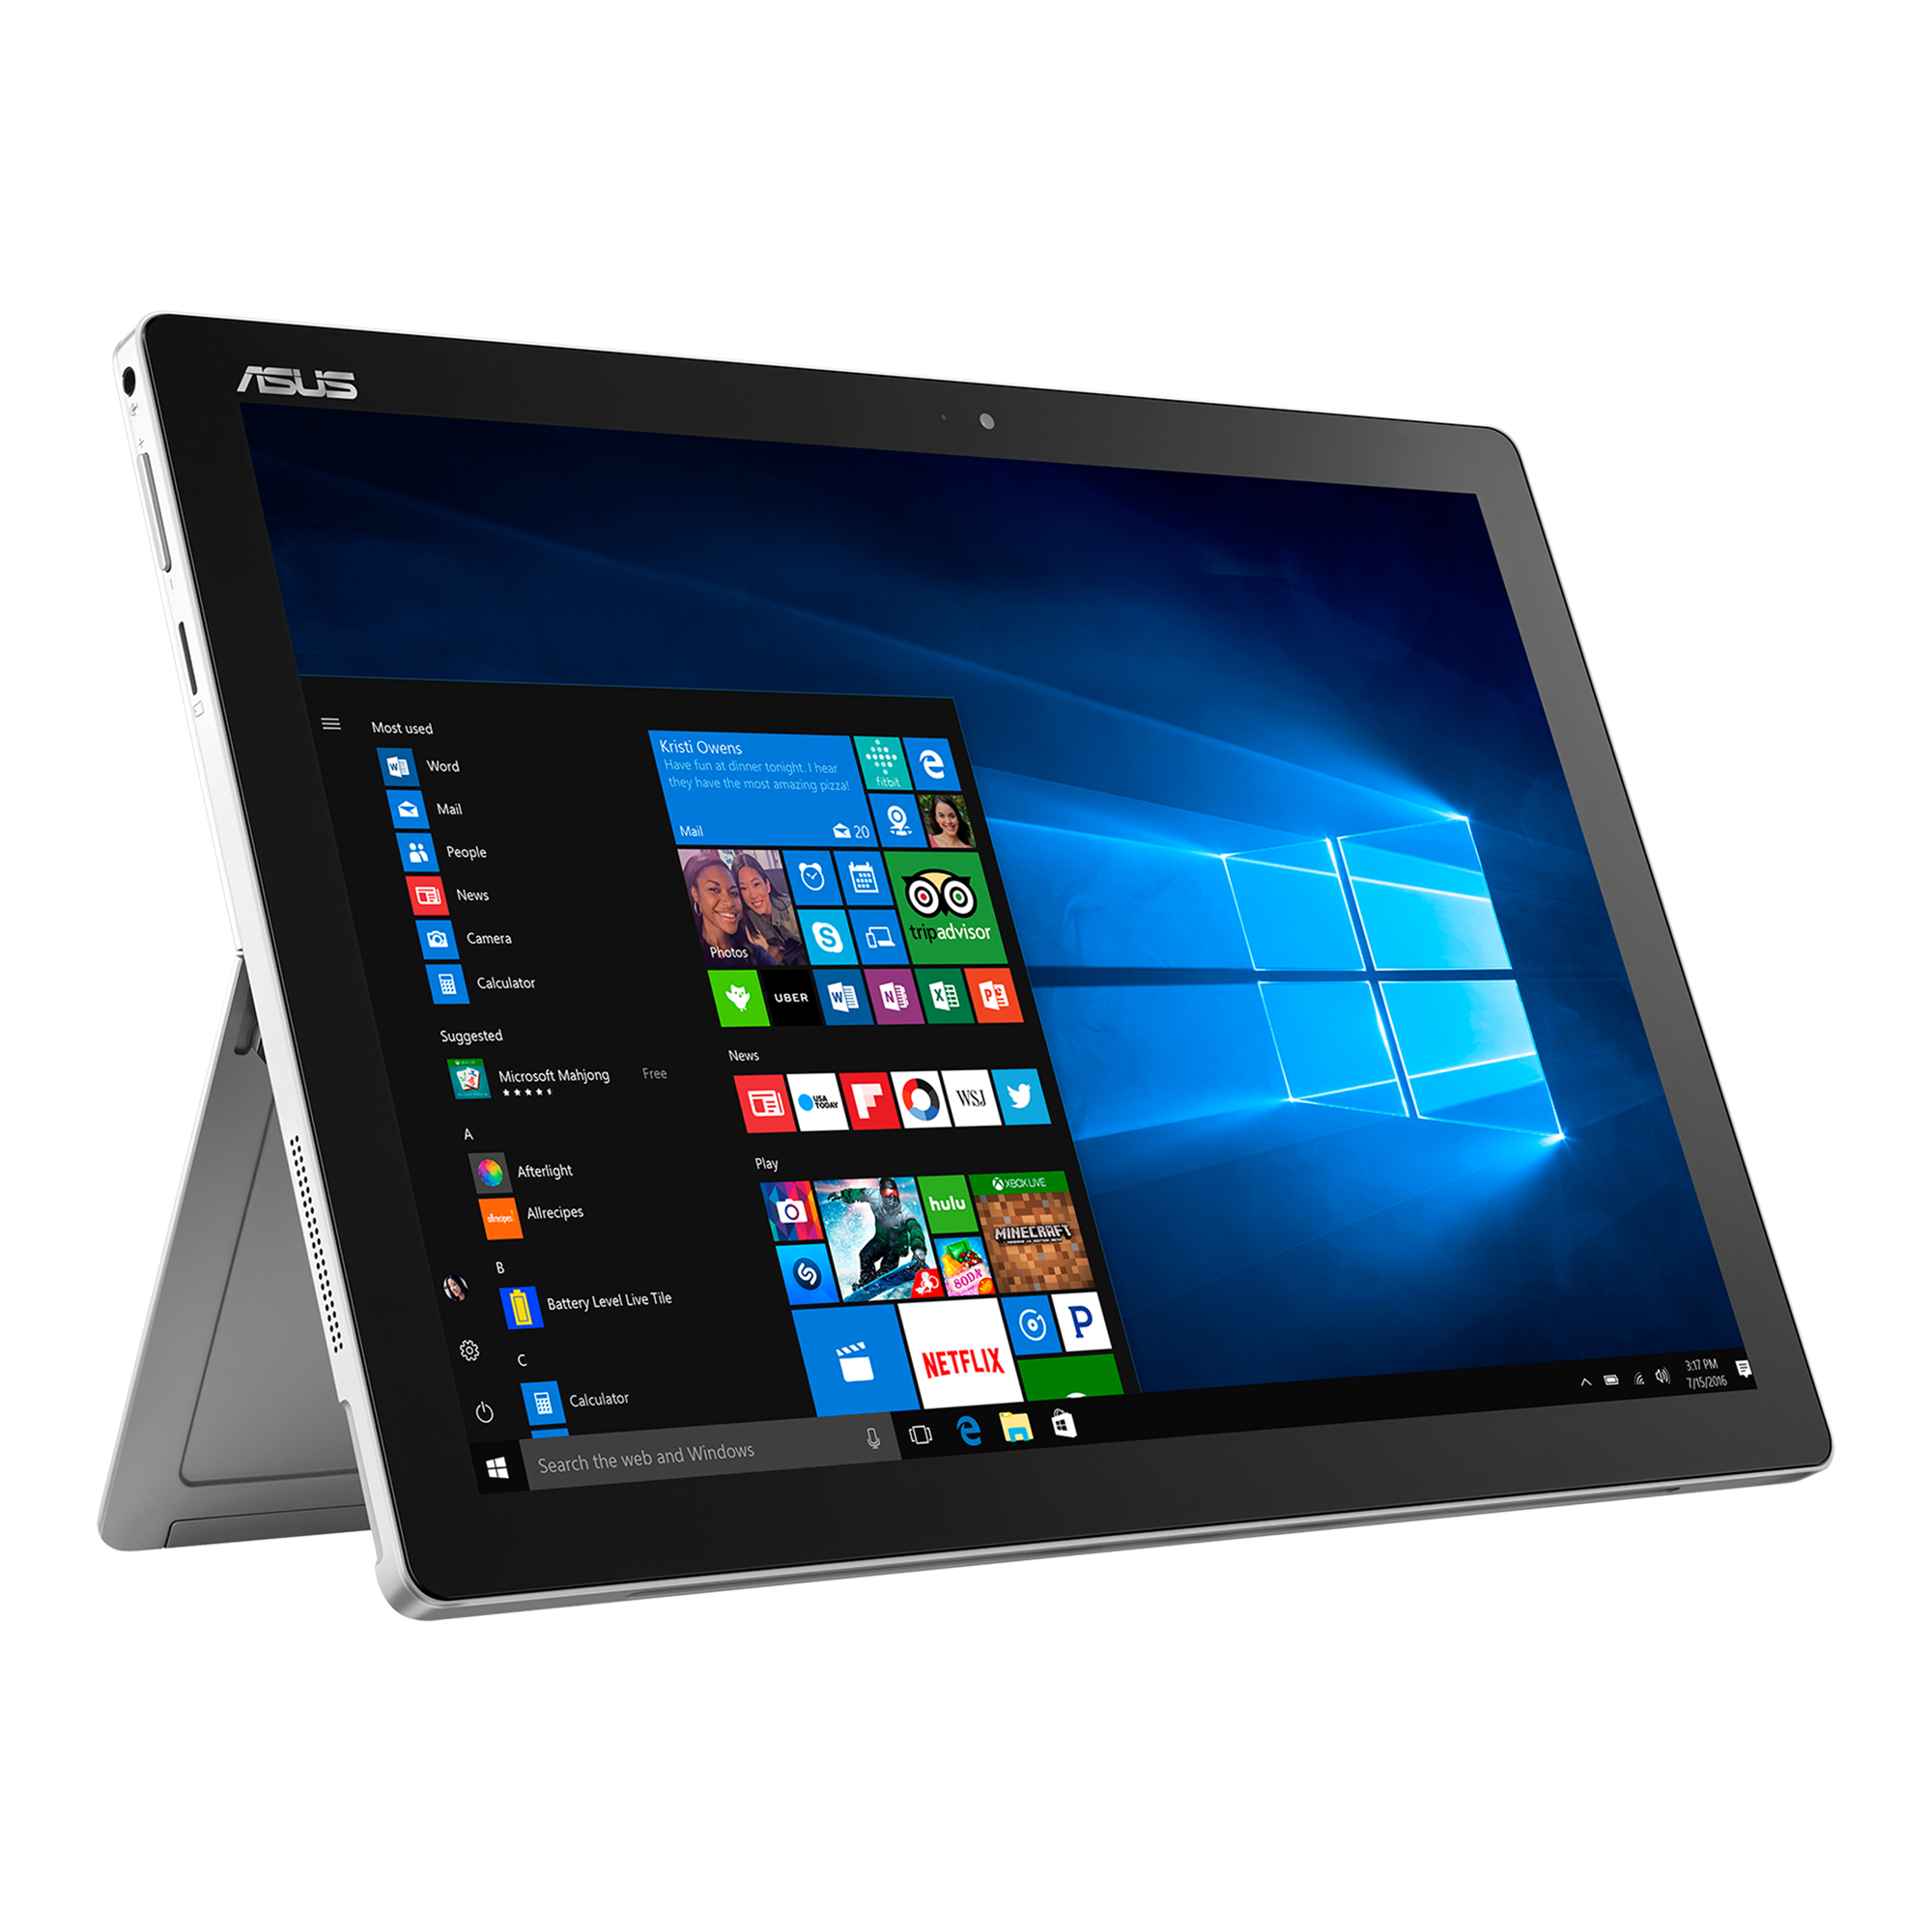 ASUS Transformer Pro T304｜Laptops For Students｜ASUS USA